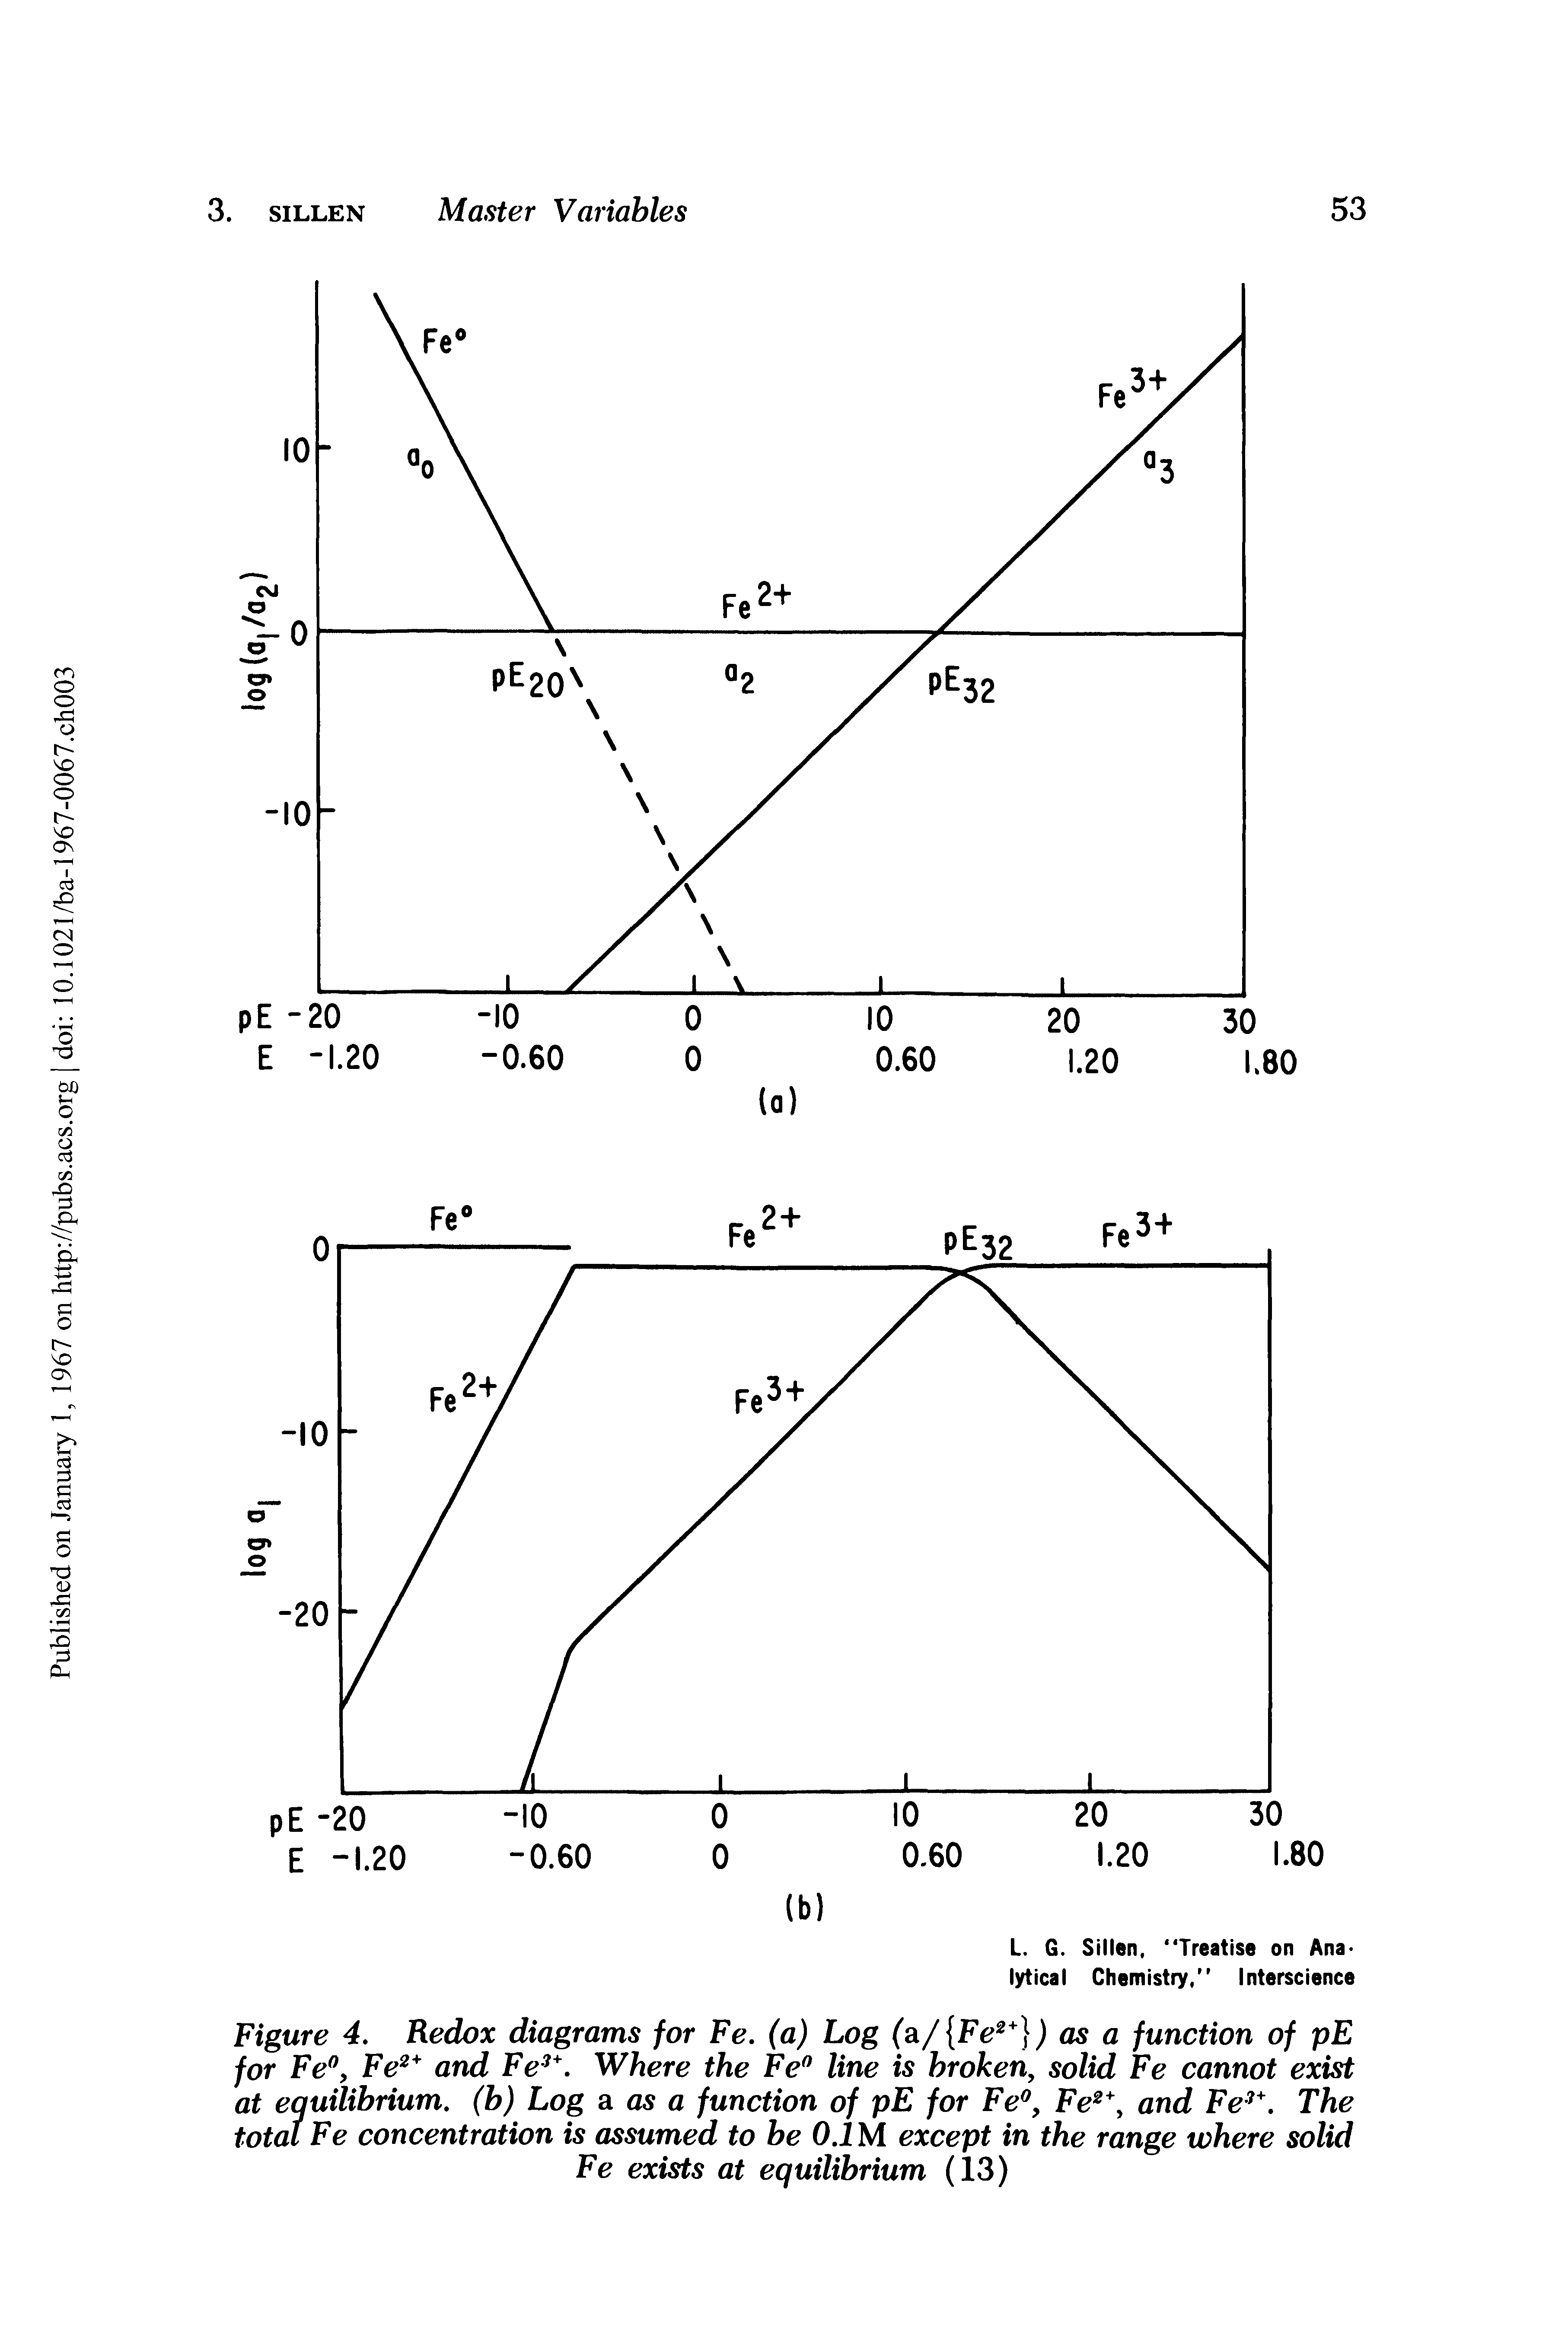 Figure 4. Redox diagrams for Fe. (a) Log (a/ Fe2+ ) as a function of pE for Fe°, Fe2+ and Fe3+. Where the Fe° line is broken, solid Fe cannot exist at equilibrium, (b) Log a as a function of pE for Fe°, Fe2 and Fe3+. The total Fe concentration is assumed to be 0.1 M except in the range where solid Fe exists at equilibrium (13)...